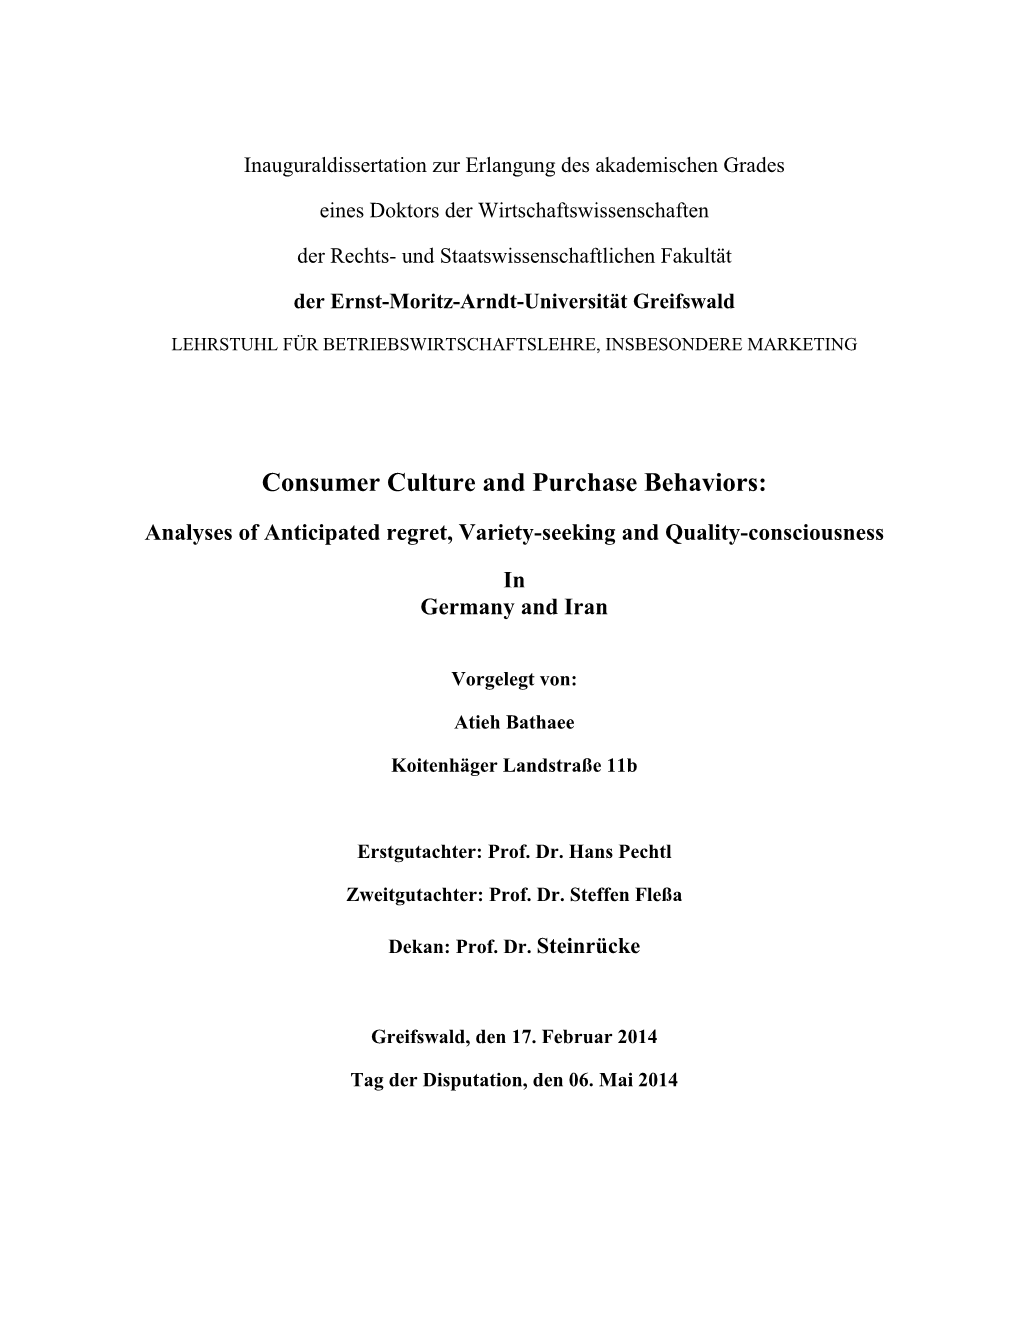 Consumer Culture and Purchase Behaviors